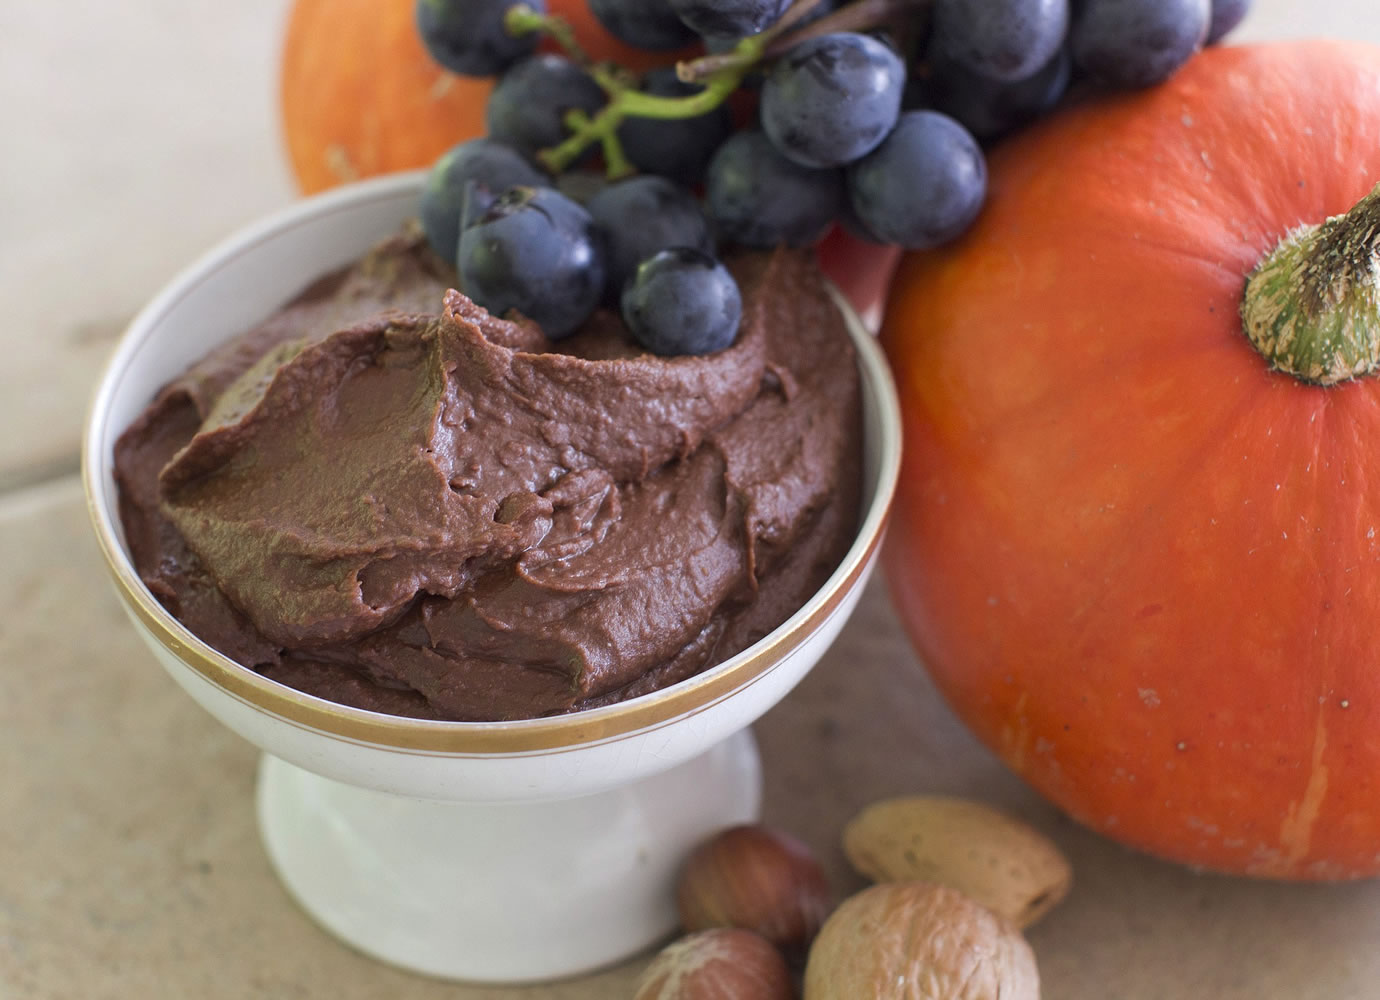 Chocolate Hummus is rich, creamy and chocolatey, and thick enough to spread easily.